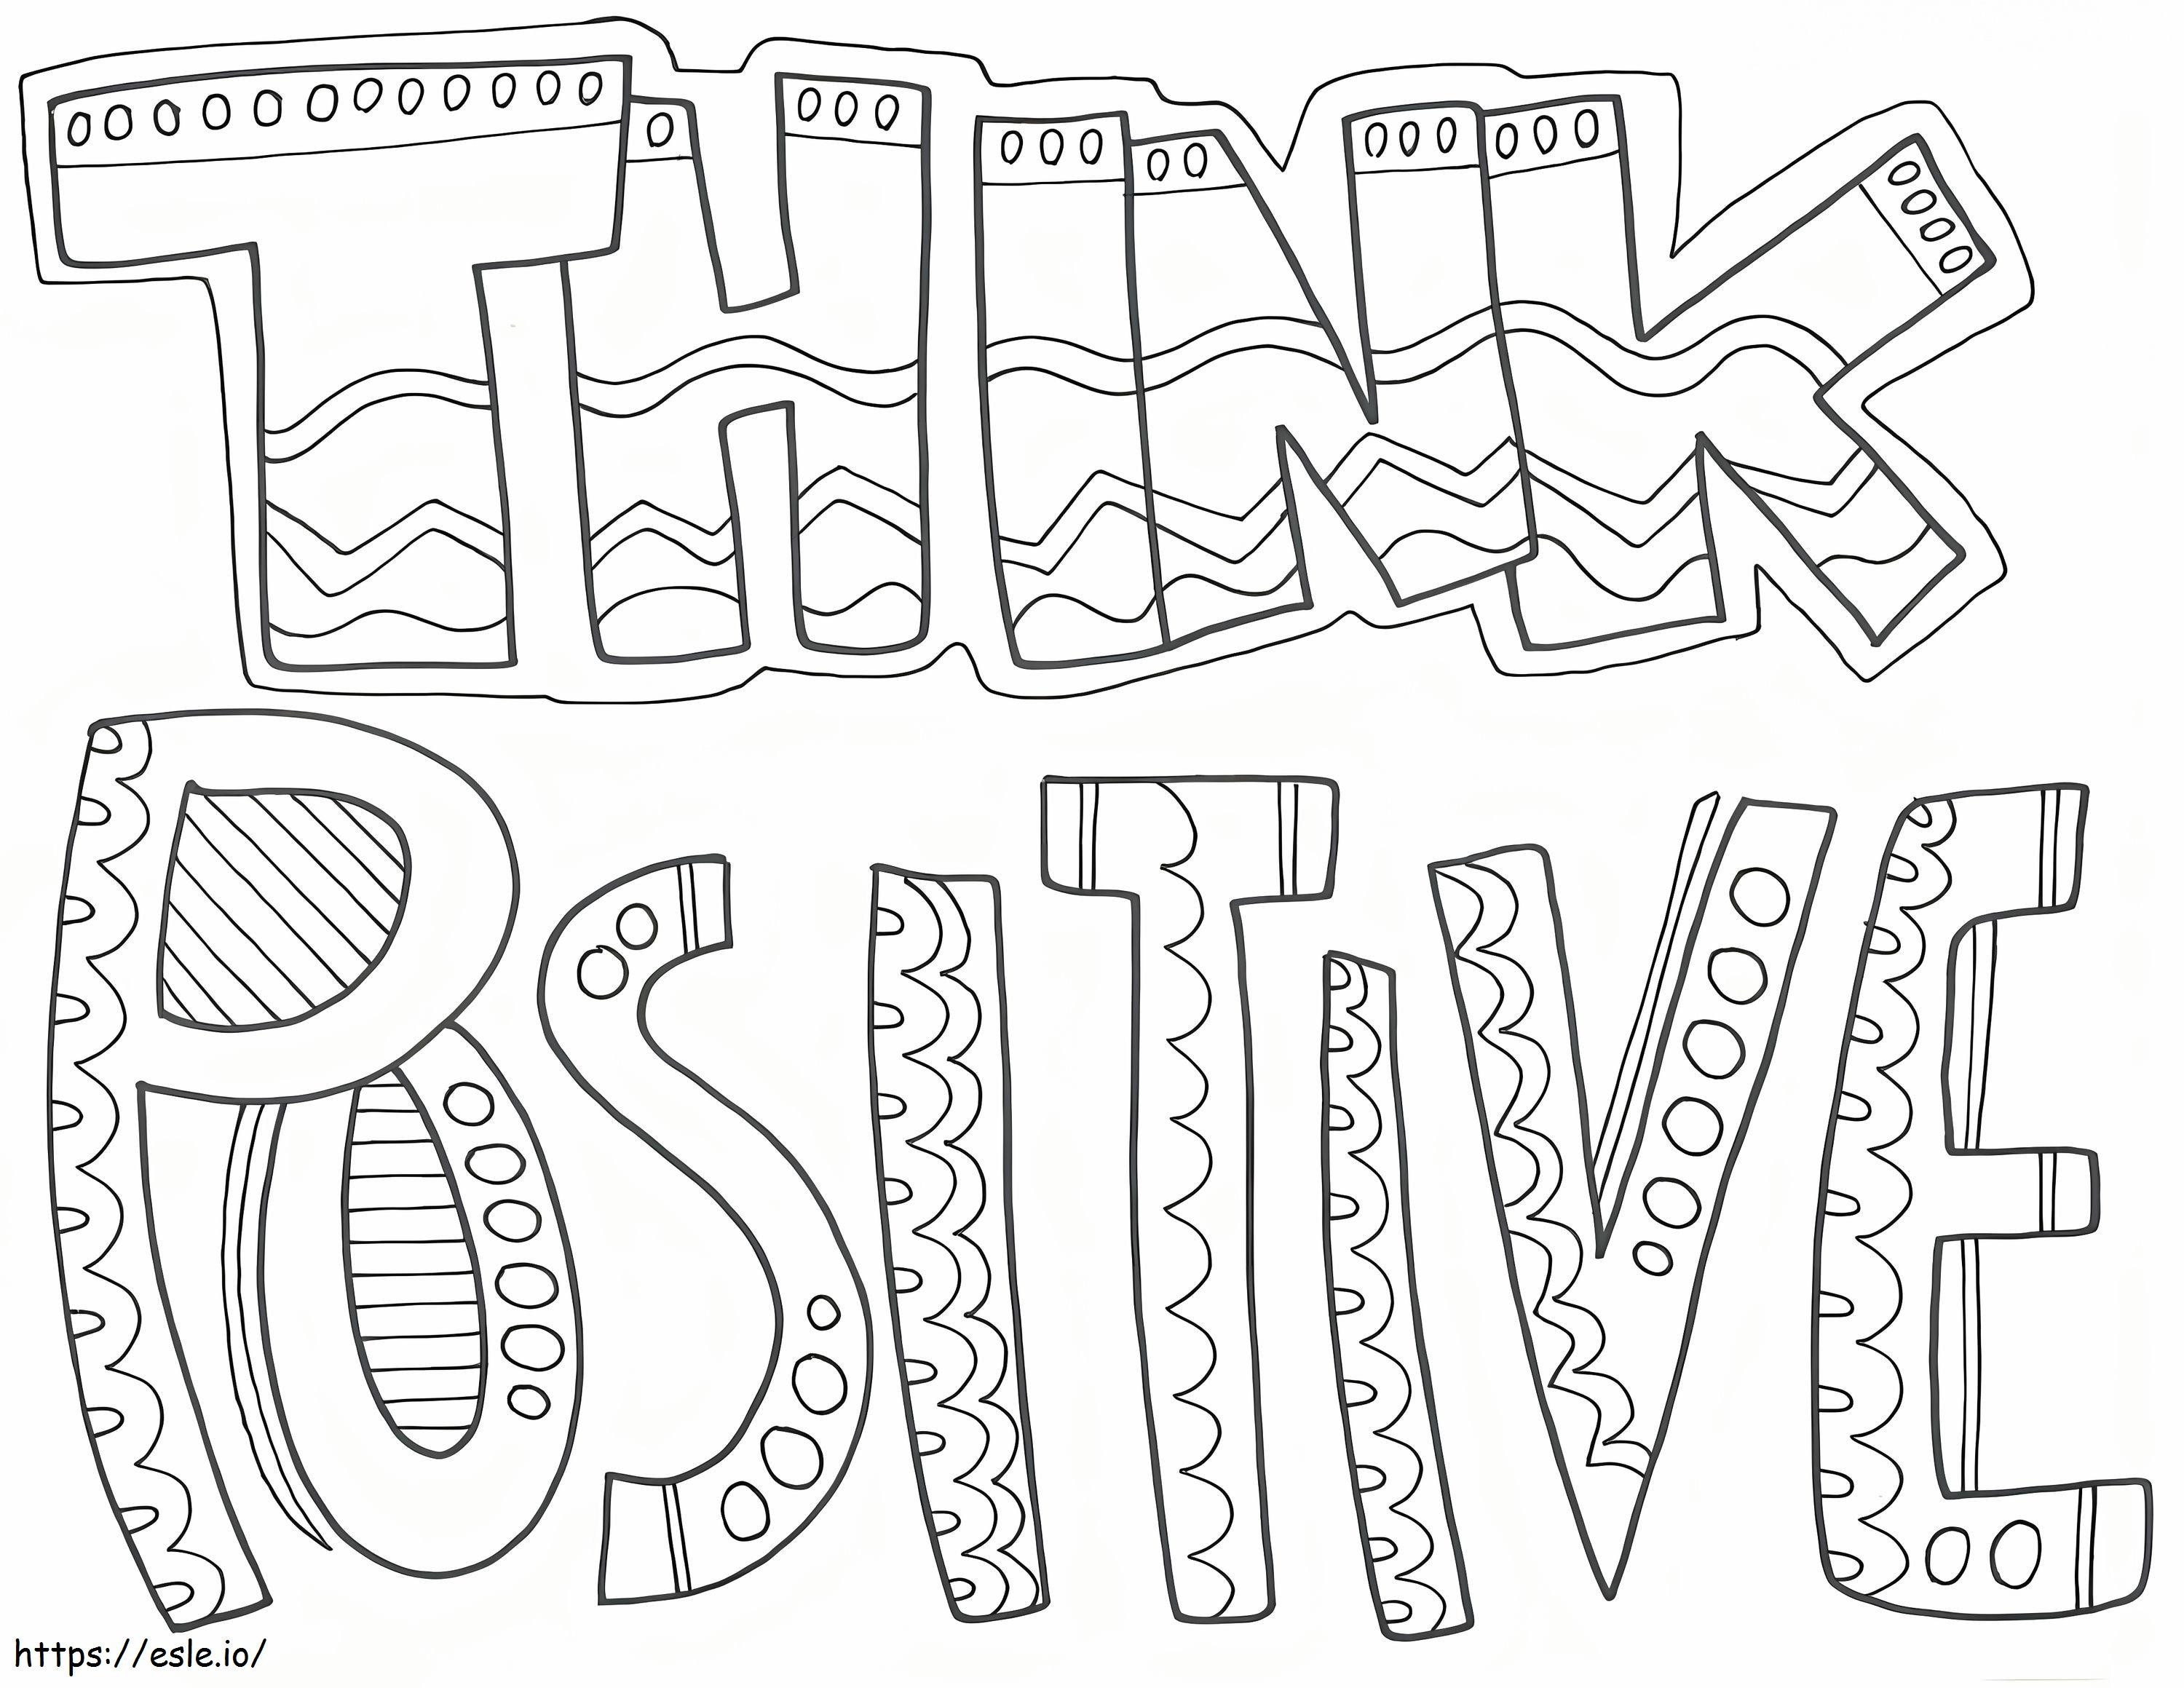 Think Positive coloring page